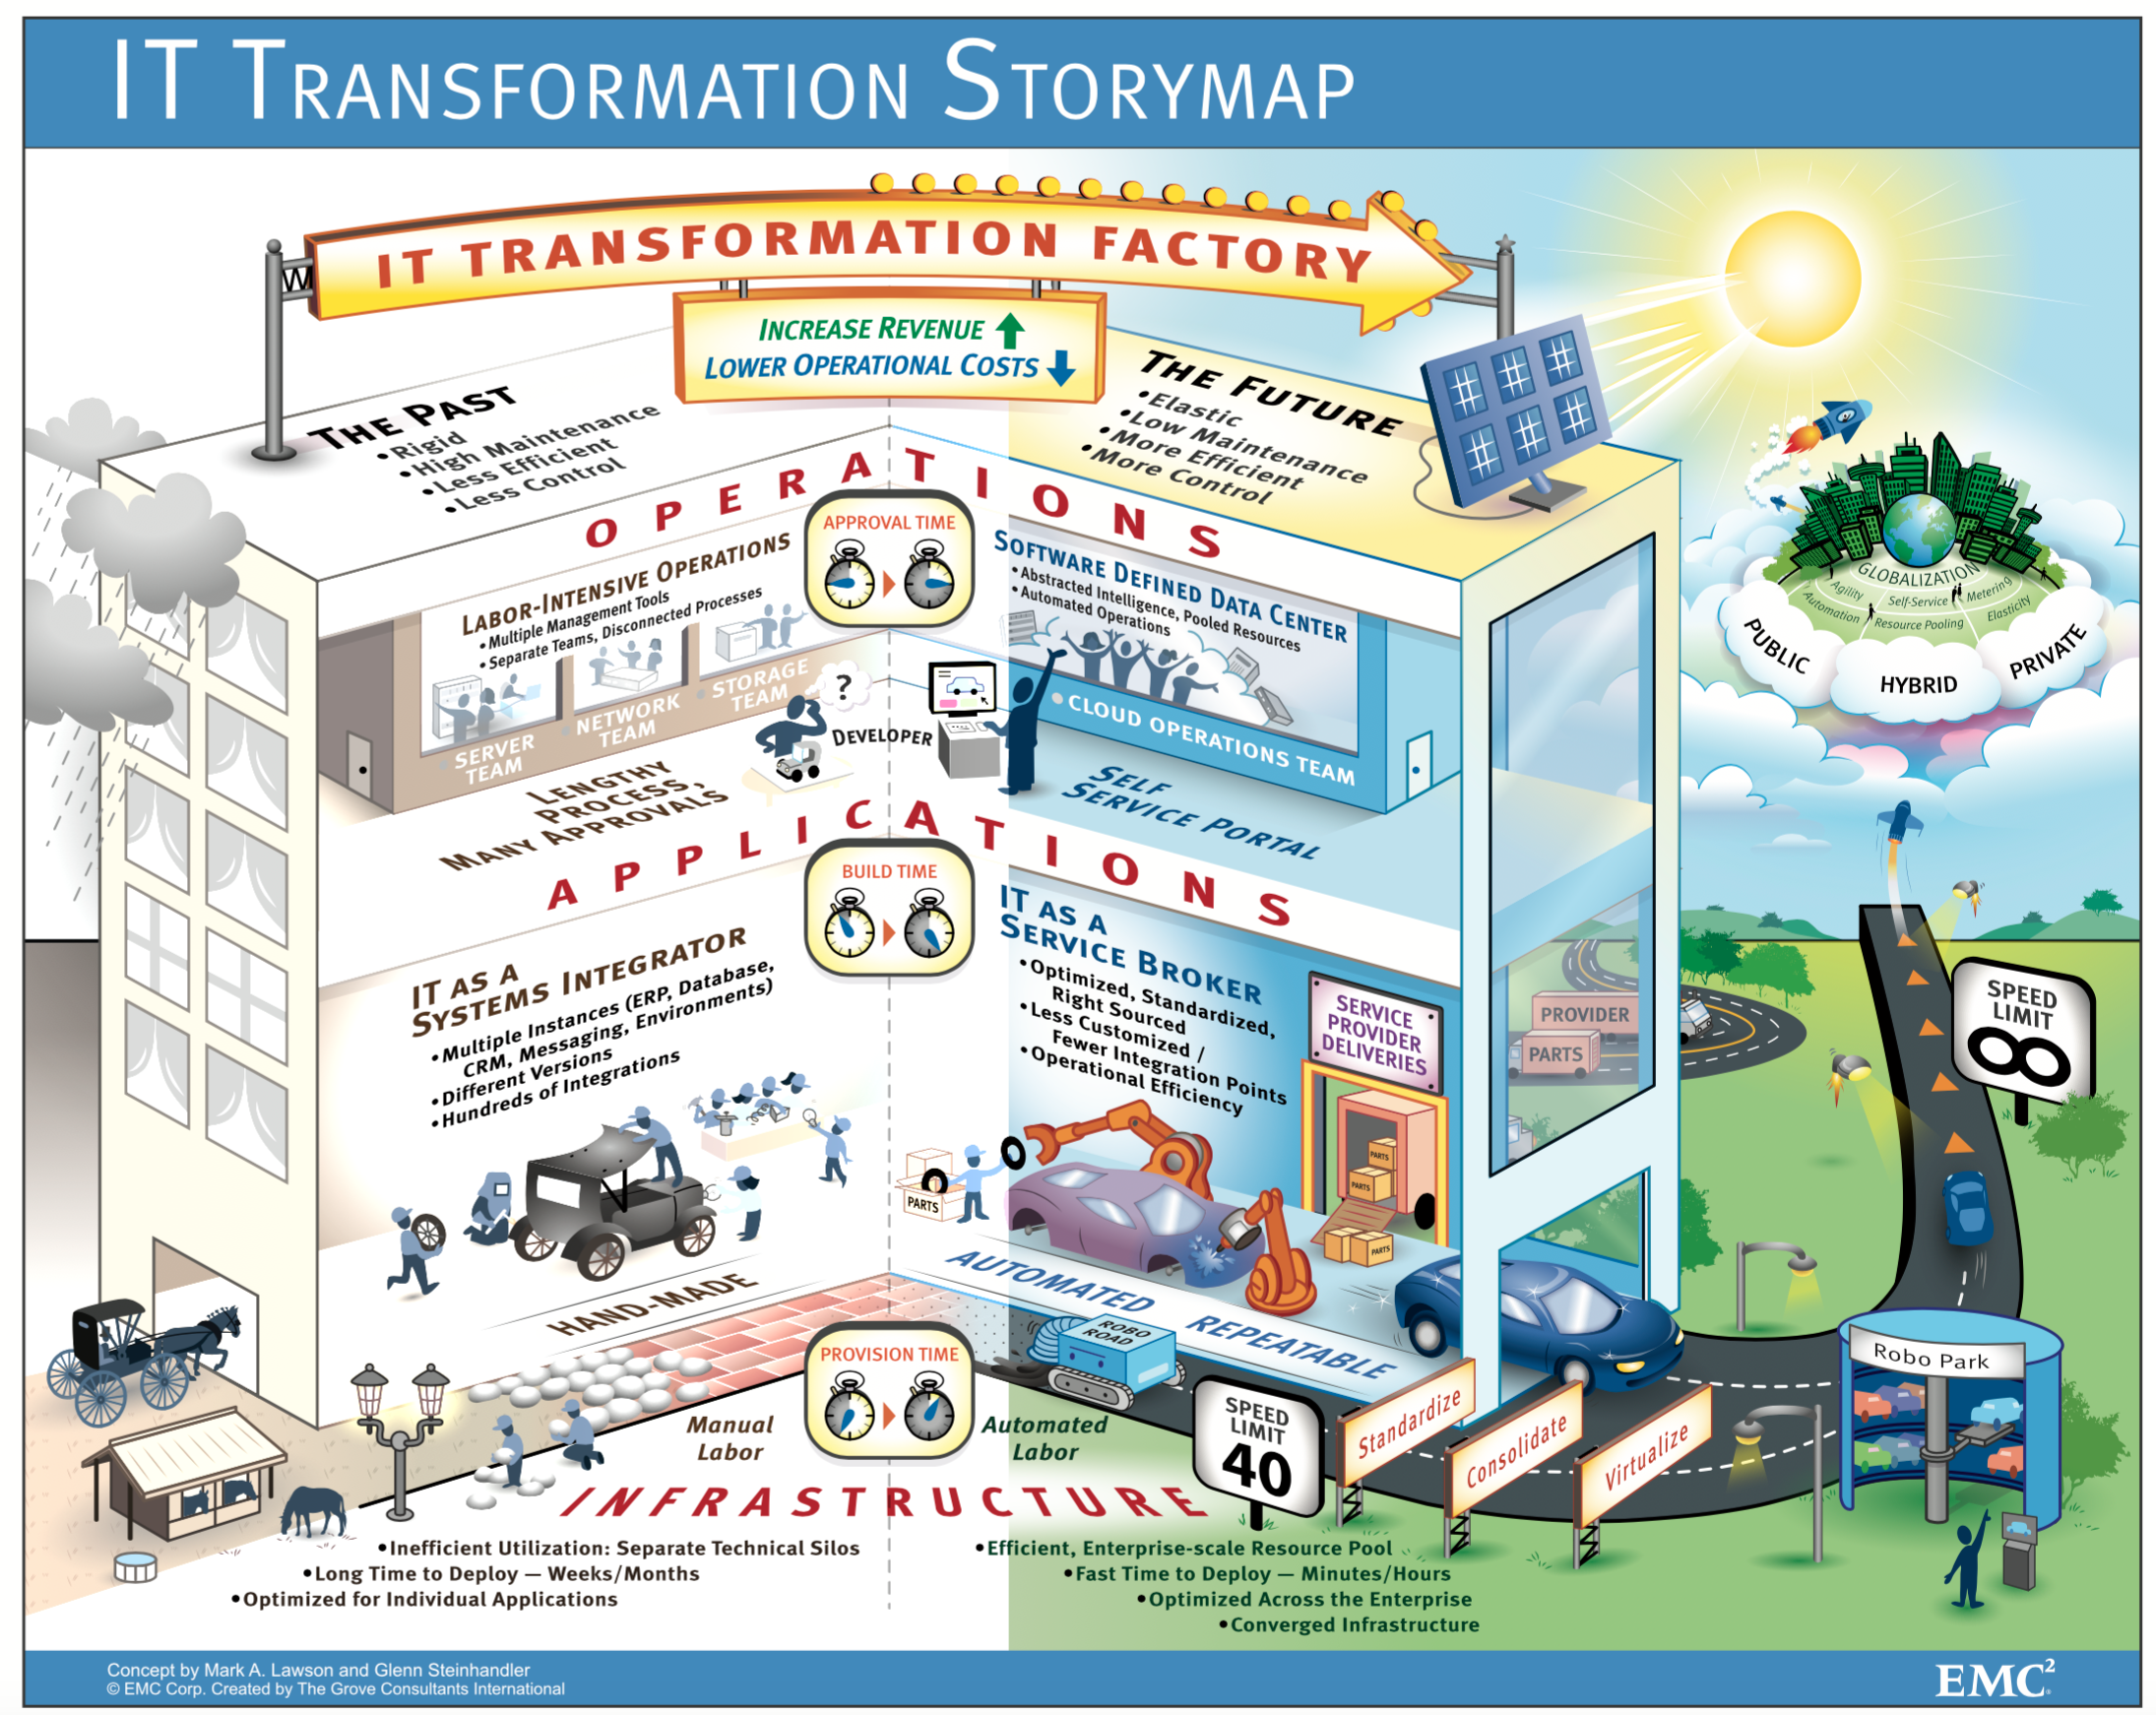  A journey through the evolution of IT transformation, showcasing success stories across various industries.